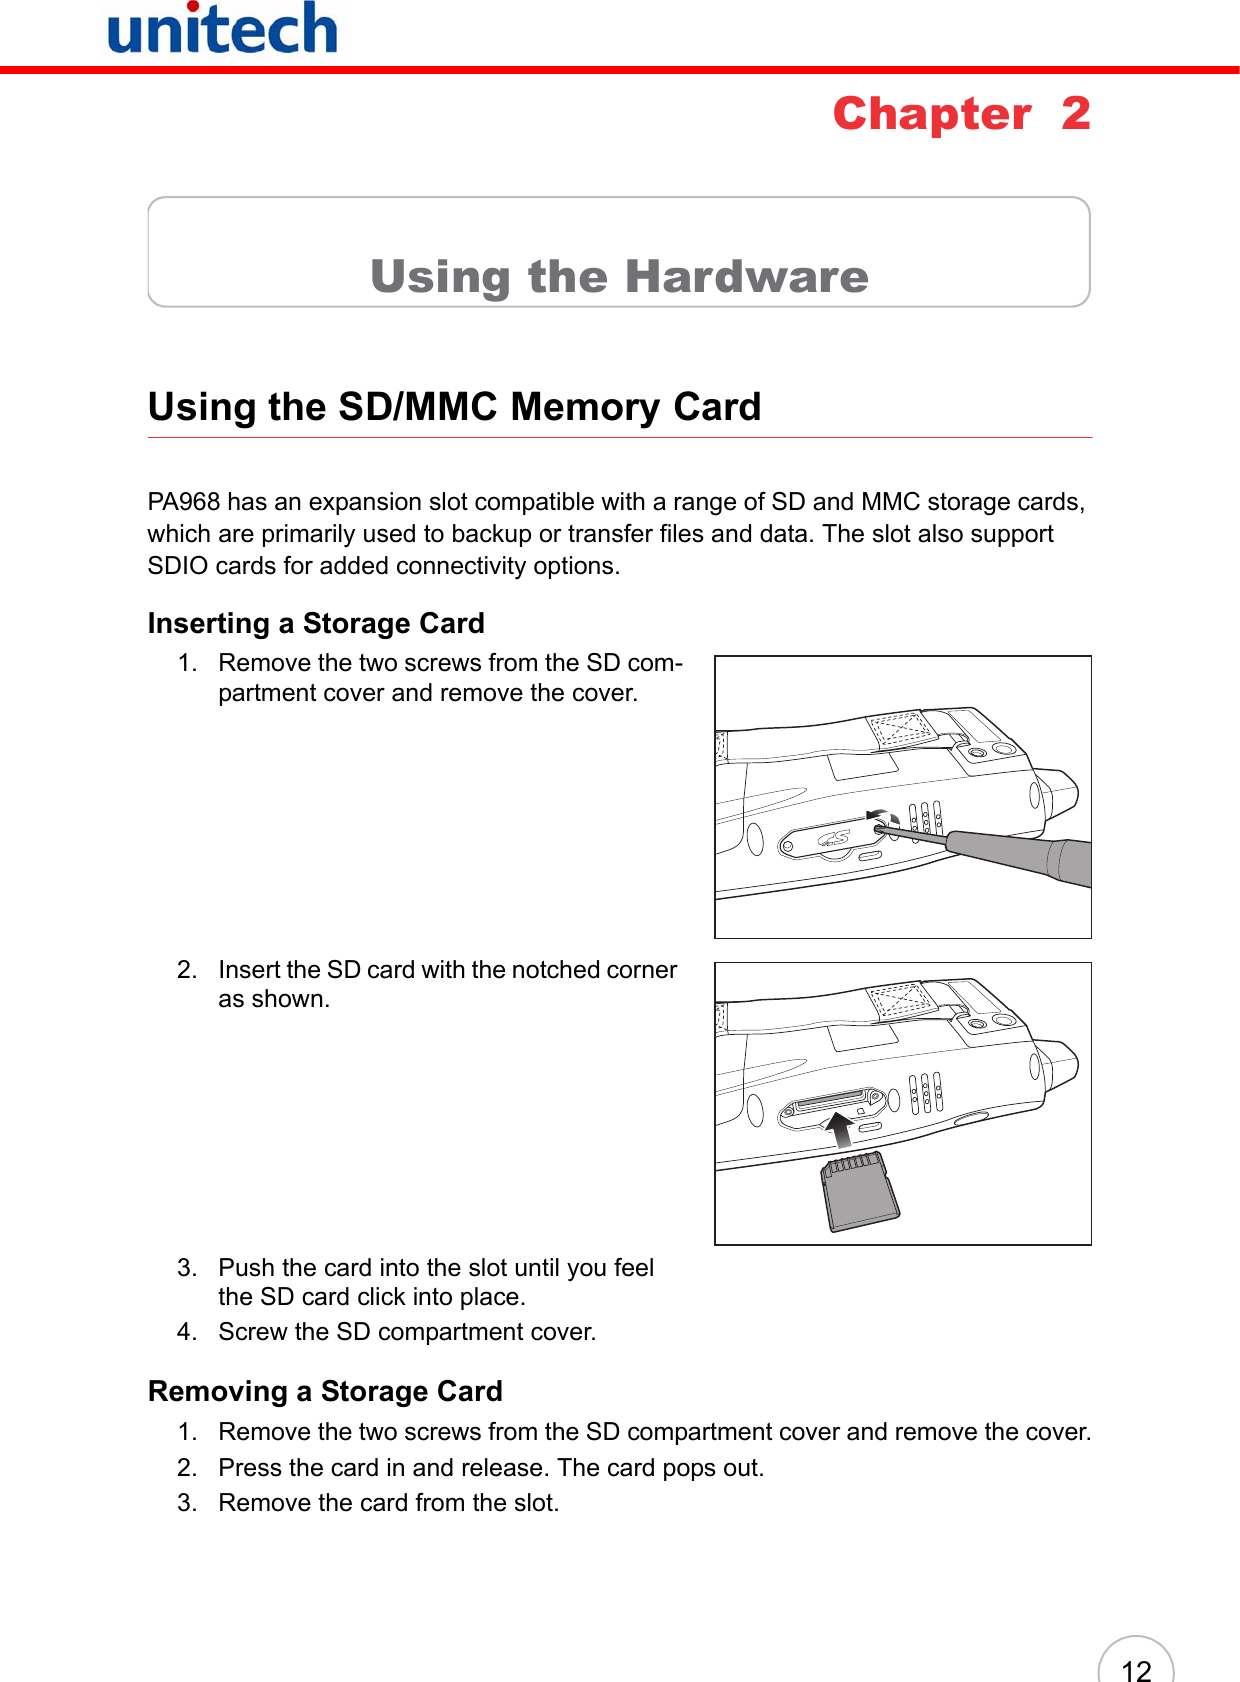 12Chapter  2Using the HardwareUsing the SD/MMC Memory CardPA968 has an expansion slot compatible with a range of SD and MMC storage cards, which are primarily used to backup or transfer files and data. The slot also support SDIO cards for added connectivity options.Inserting a Storage Card1. Remove the two screws from the SD com-partment cover and remove the cover. 2. Insert the SD card with the notched corner as shown.3. Push the card into the slot until you feel the SD card click into place.4. Screw the SD compartment cover.Removing a Storage Card1. Remove the two screws from the SD compartment cover and remove the cover.2. Press the card in and release. The card pops out.3. Remove the card from the slot.